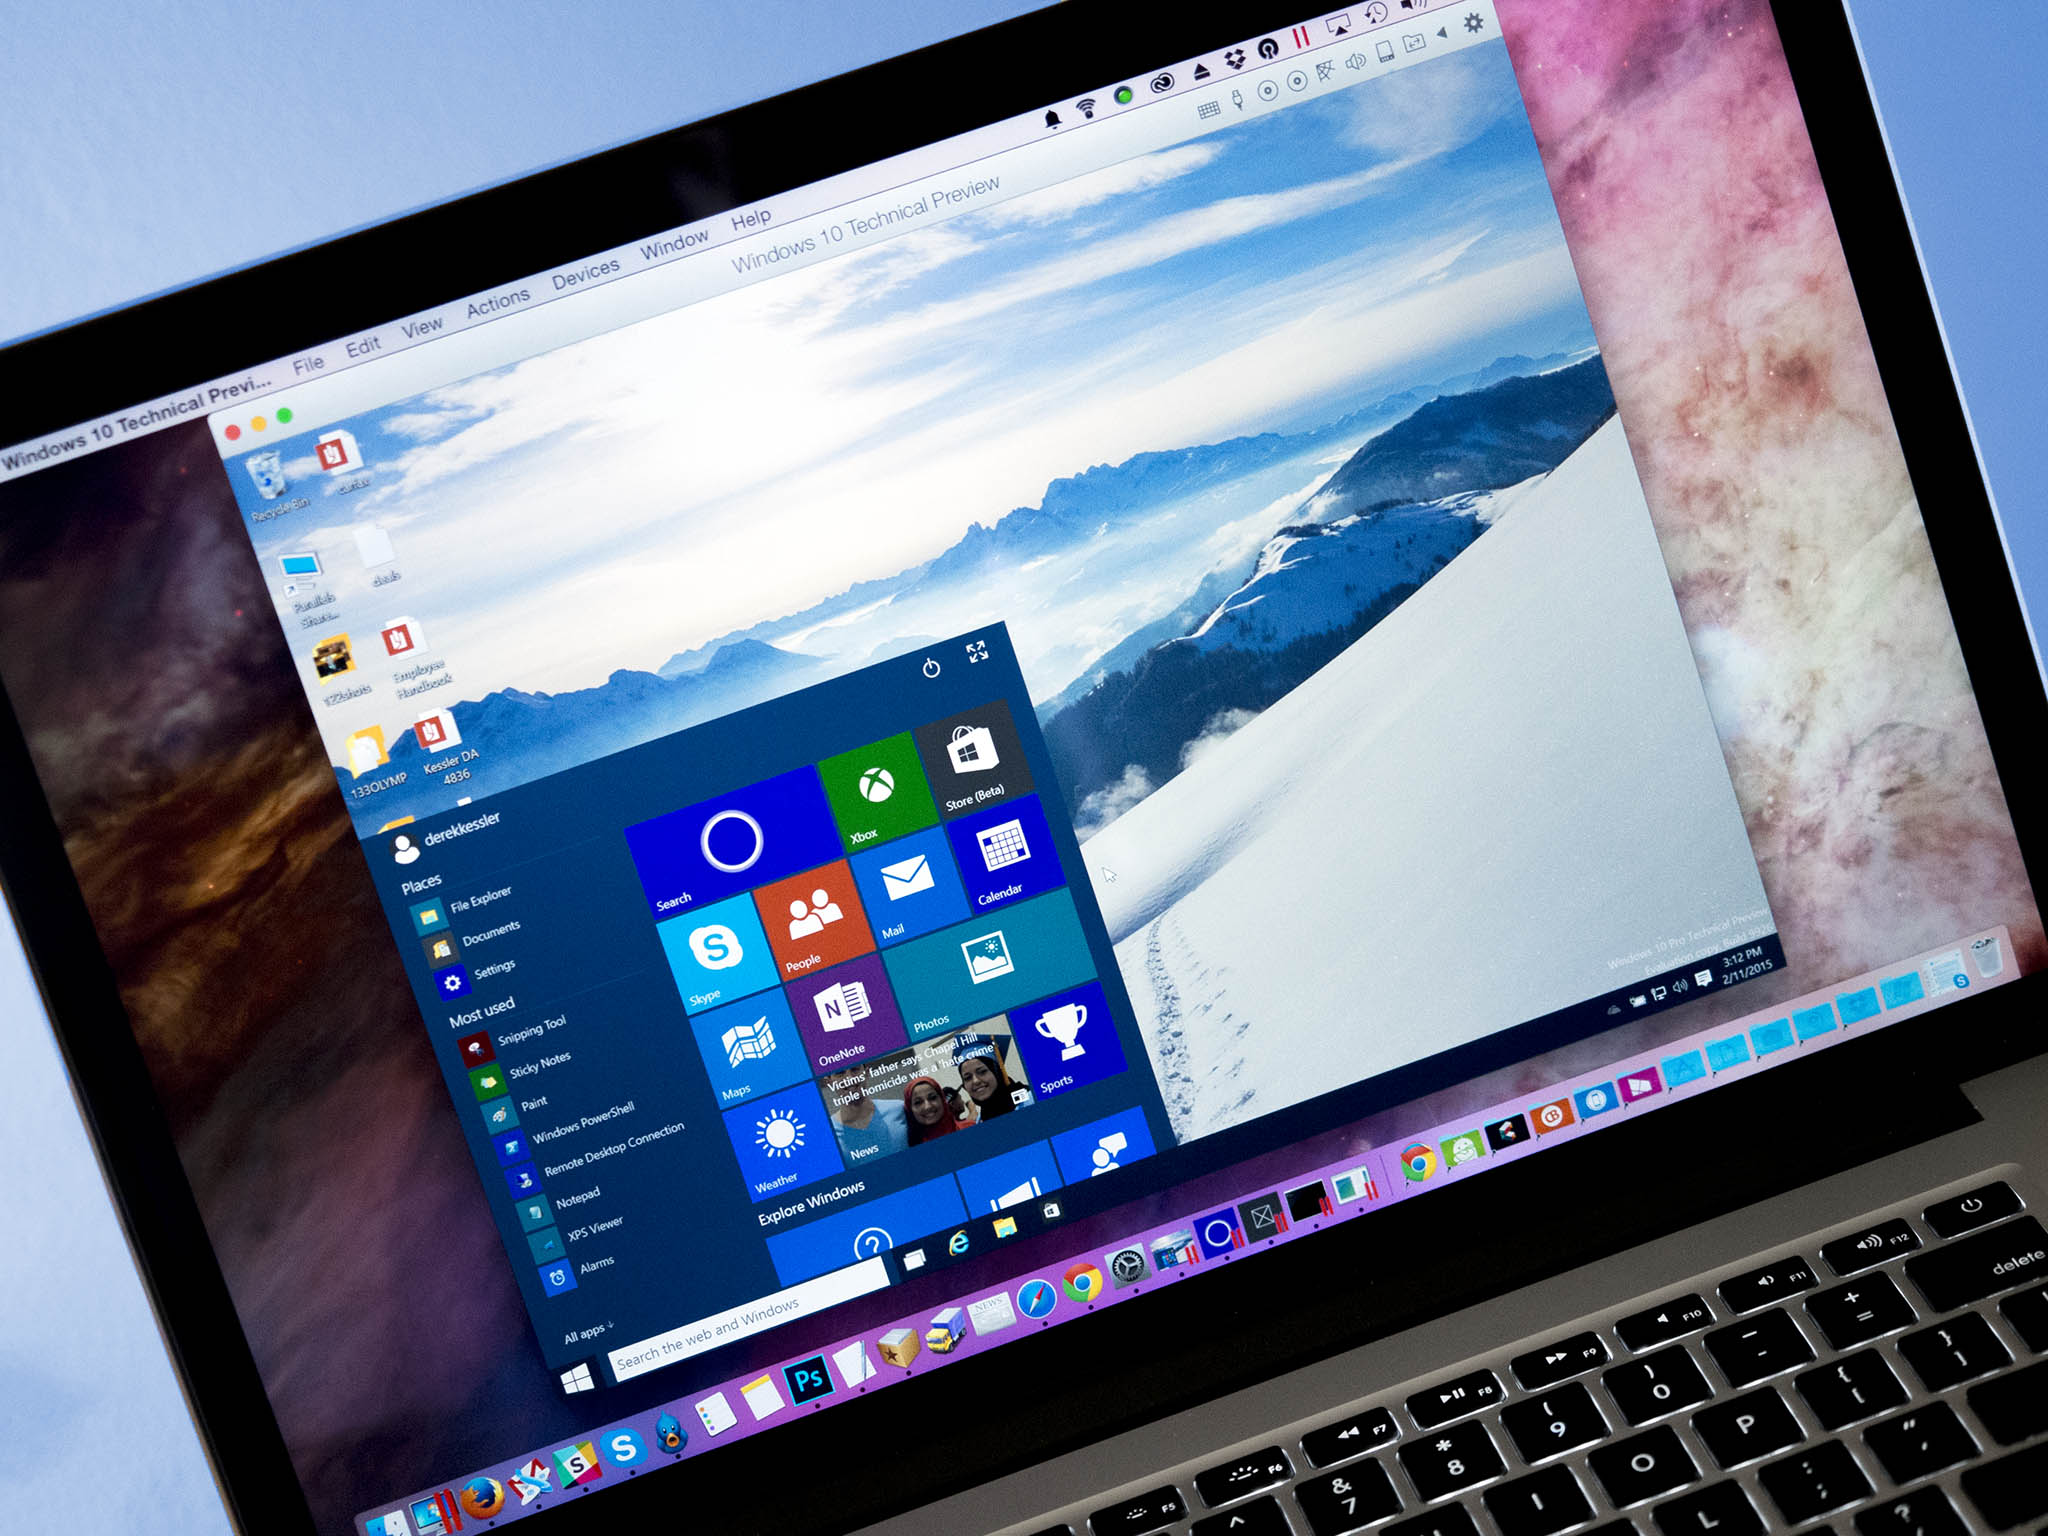 Parallels now supports running Windows 10 inside OS X | Windows Central